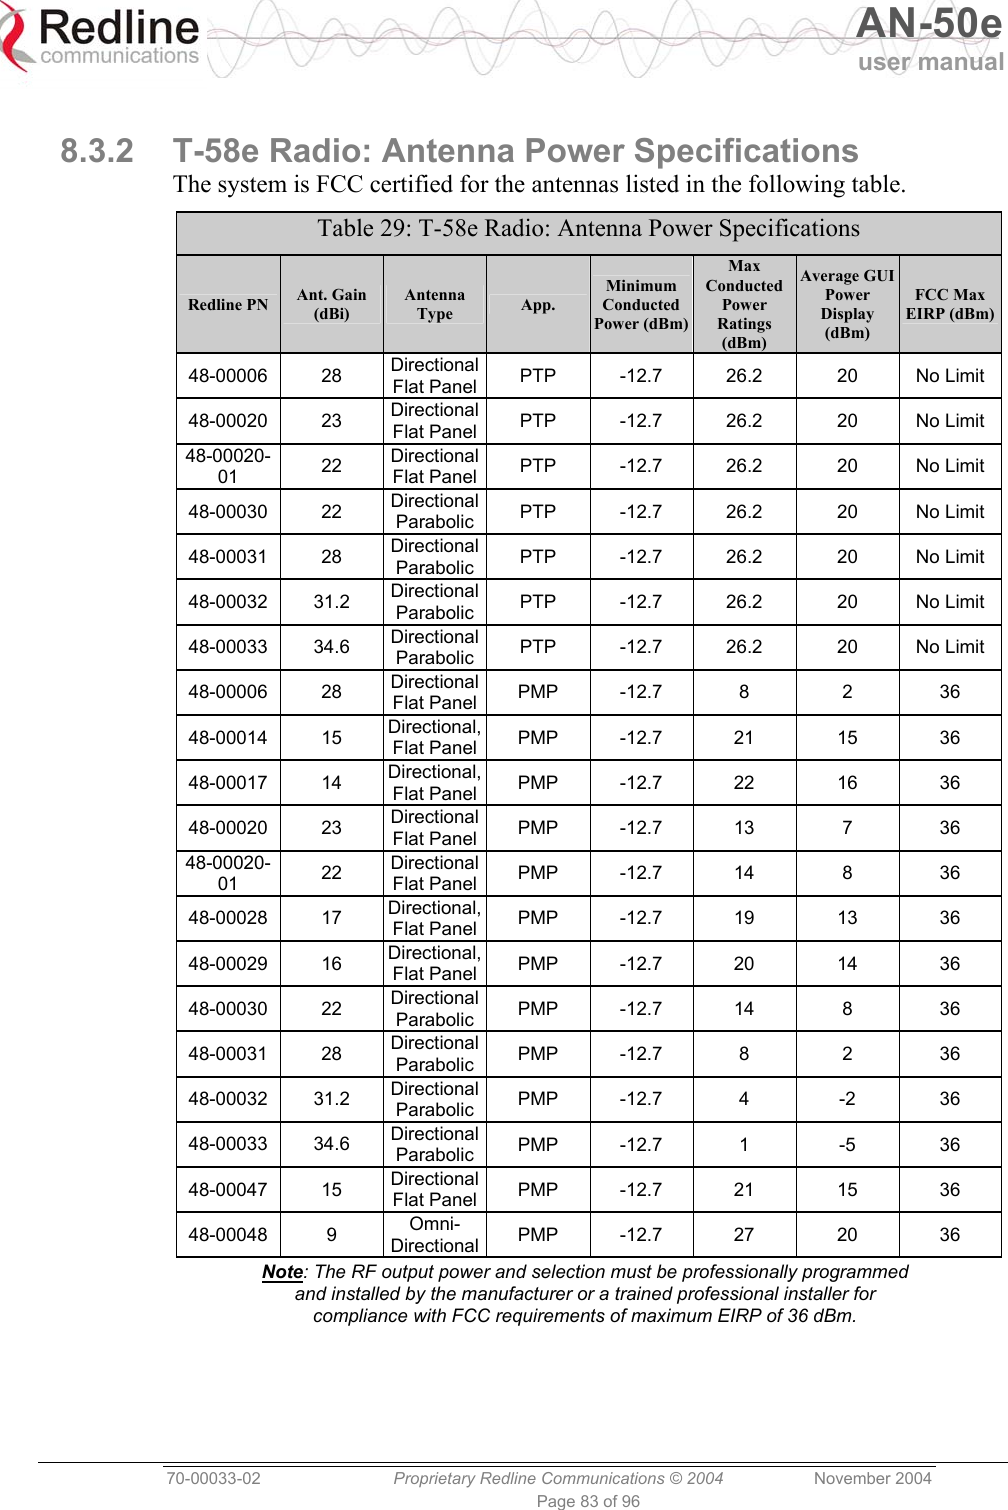   AN-50e user manual  70-00033-02  Proprietary Redline Communications © 2004 November 2004 Page 83 of 96  8.3.2  T-58e Radio: Antenna Power Specifications The system is FCC certified for the antennas listed in the following table. Table 29: T-58e Radio: Antenna Power Specifications Redline PN  Ant. Gain (dBi) Antenna Type  App. Minimum Conducted Power (dBm)Max Conducted Power Ratings (dBm) Average GUI Power Display (dBm) FCC Max EIRP (dBm)48-00006 28 Directional Flat Panel PTP -12.7 26.2  20 No Limit 48-00020 23 Directional Flat Panel PTP -12.7 26.2  20 No Limit 48-00020-01  22  Directional Flat Panel PTP -12.7 26.2  20 No Limit 48-00030 22 Directional Parabolic  PTP -12.7 26.2  20 No Limit 48-00031 28 Directional Parabolic  PTP -12.7 26.2  20 No Limit 48-00032 31.2 Directional Parabolic  PTP -12.7 26.2  20 No Limit 48-00033 34.6 Directional Parabolic  PTP -12.7 26.2  20 No Limit 48-00006 28 Directional Flat Panel PMP -12.7  8  2  36 48-00014 15 Directional, Flat Panel PMP -12.7  21  15  36 48-00017 14 Directional, Flat Panel PMP -12.7  22  16  36 48-00020 23 Directional Flat Panel PMP -12.7  13  7  36 48-00020-01  22  Directional Flat Panel PMP -12.7  14  8  36 48-00028 17 Directional, Flat Panel PMP -12.7  19  13  36 48-00029 16 Directional, Flat Panel PMP -12.7  20  14  36 48-00030 22 Directional Parabolic  PMP -12.7  14  8  36 48-00031 28 Directional Parabolic  PMP -12.7  8  2  36 48-00032 31.2 Directional Parabolic  PMP -12.7  4  -2  36 48-00033 34.6 Directional Parabolic  PMP -12.7  1  -5  36 48-00047 15 Directional Flat Panel  PMP -12.7  21  15  36 48-00048 9  Omni- Directional PMP -12.7  27  20  36 Note: The RF output power and selection must be professionally programmed and installed by the manufacturer or a trained professional installer for compliance with FCC requirements of maximum EIRP of 36 dBm. 